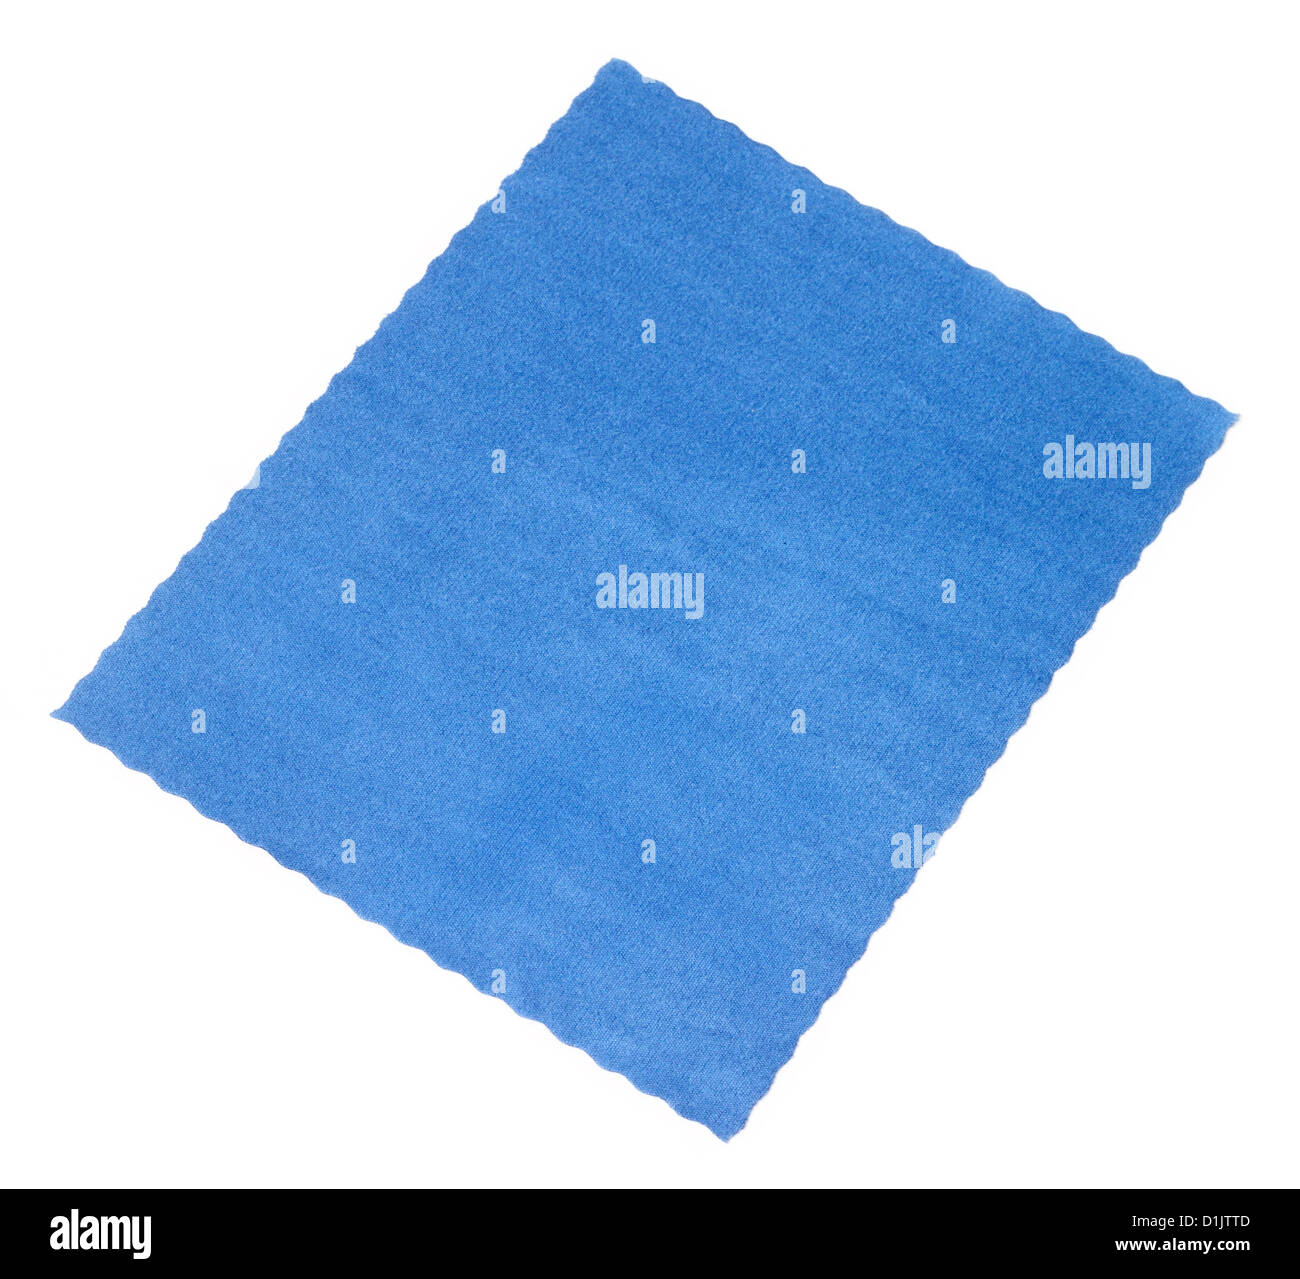 Dust wiping cloth Stock Photo